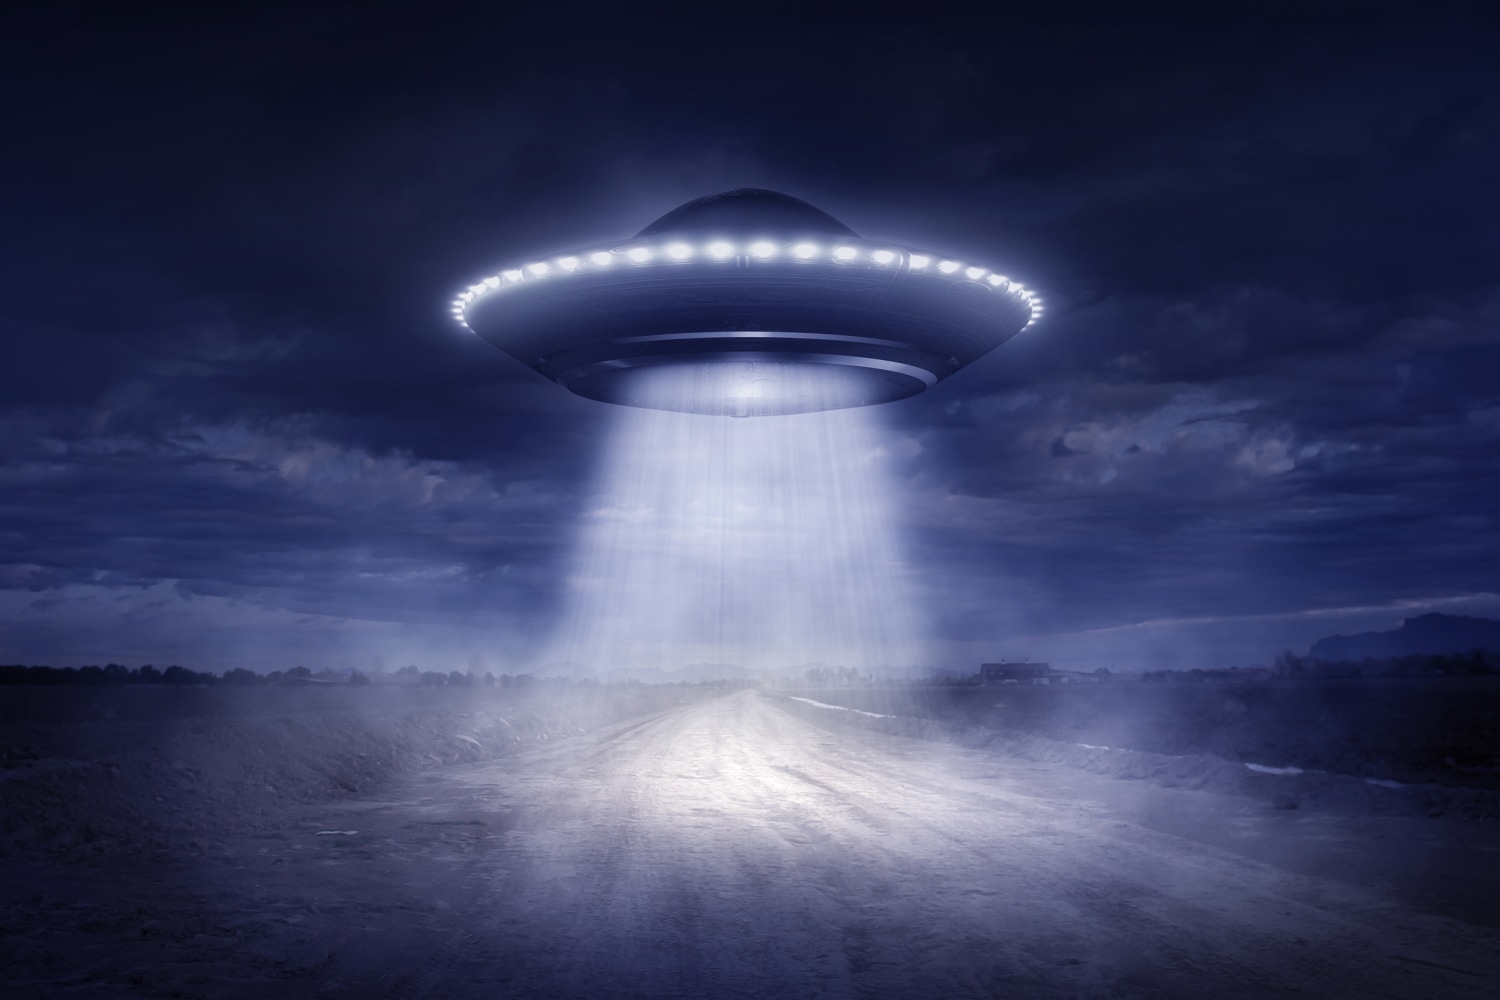 UFO believers got one thing right. Here's what they get wrong.